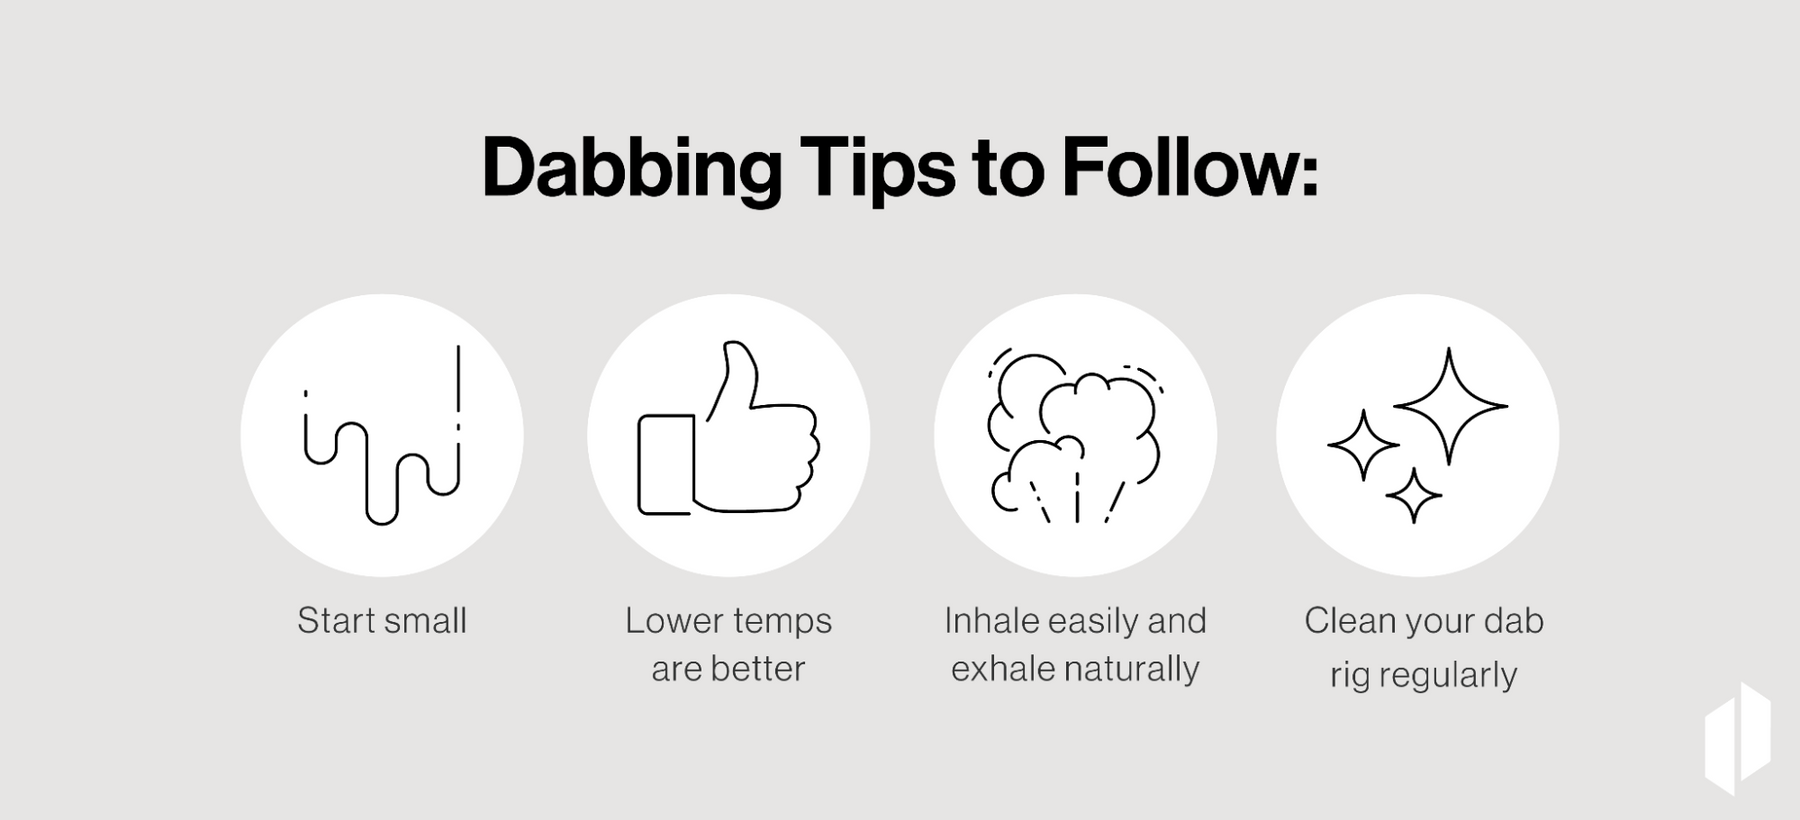 Follow these dabbing tips: start small, use lower temps, inhale easily, exhale naturally, and clean your rig regularly for a safe experience.